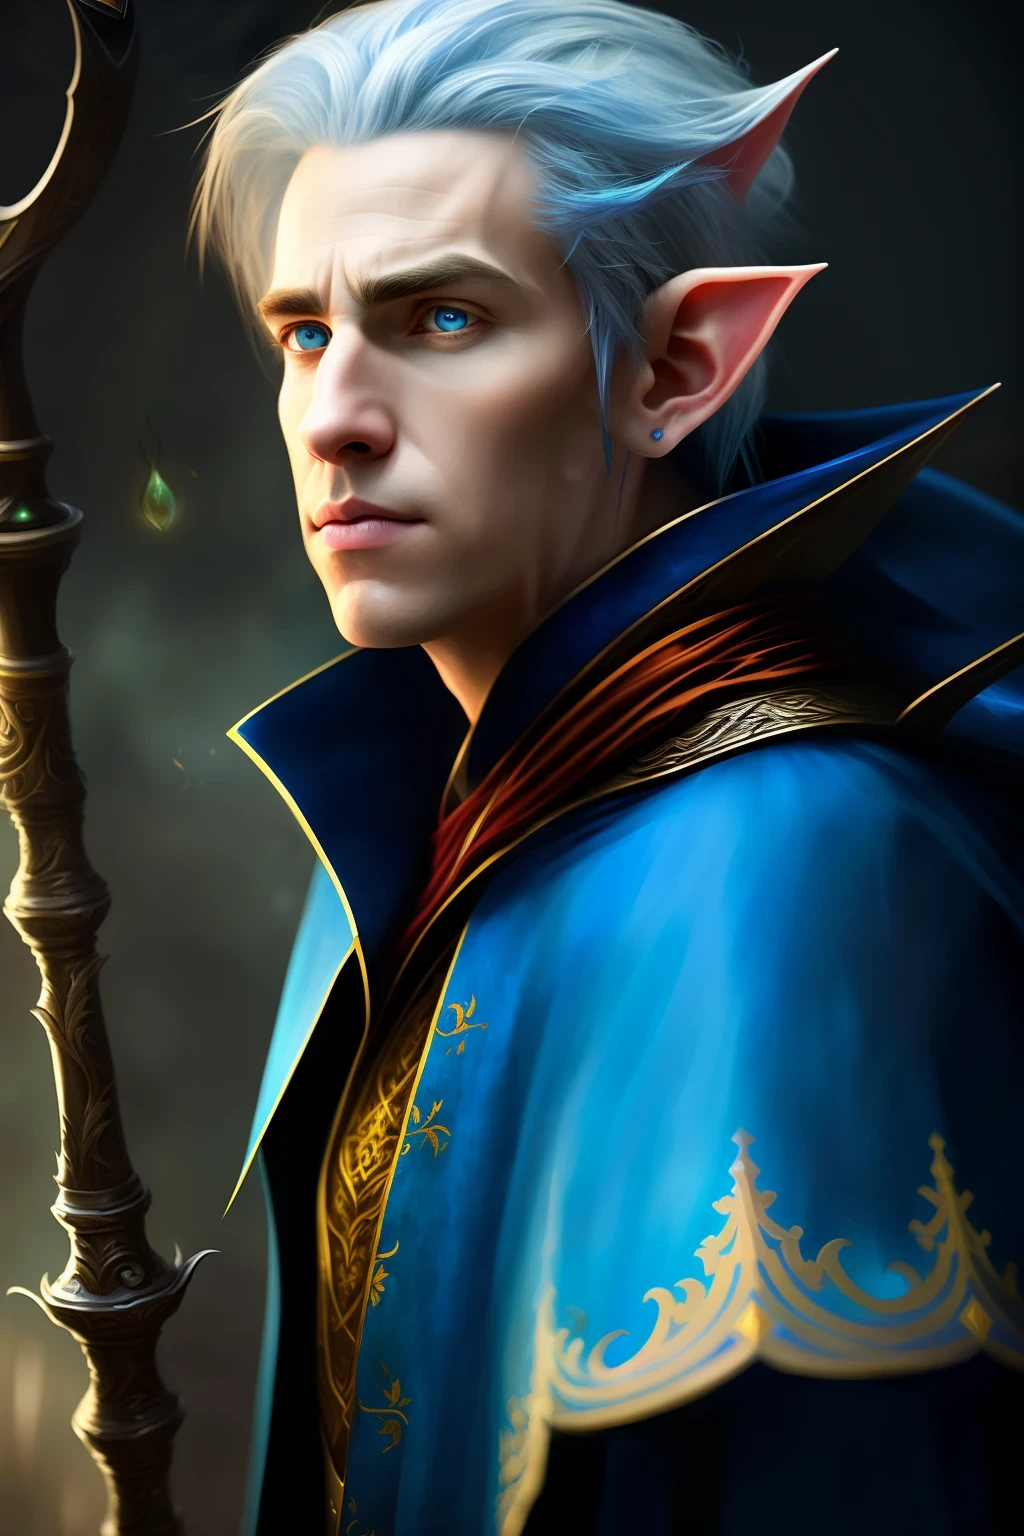 HD, Painted, Beautiful, Stunning, Portrait, Looking Sideways, Character, Concept Art, Male Elf Sorcerer, Half-Elf, Blue Mage Robe, Serious, Grim, Spiky Hair, Holding a Staff